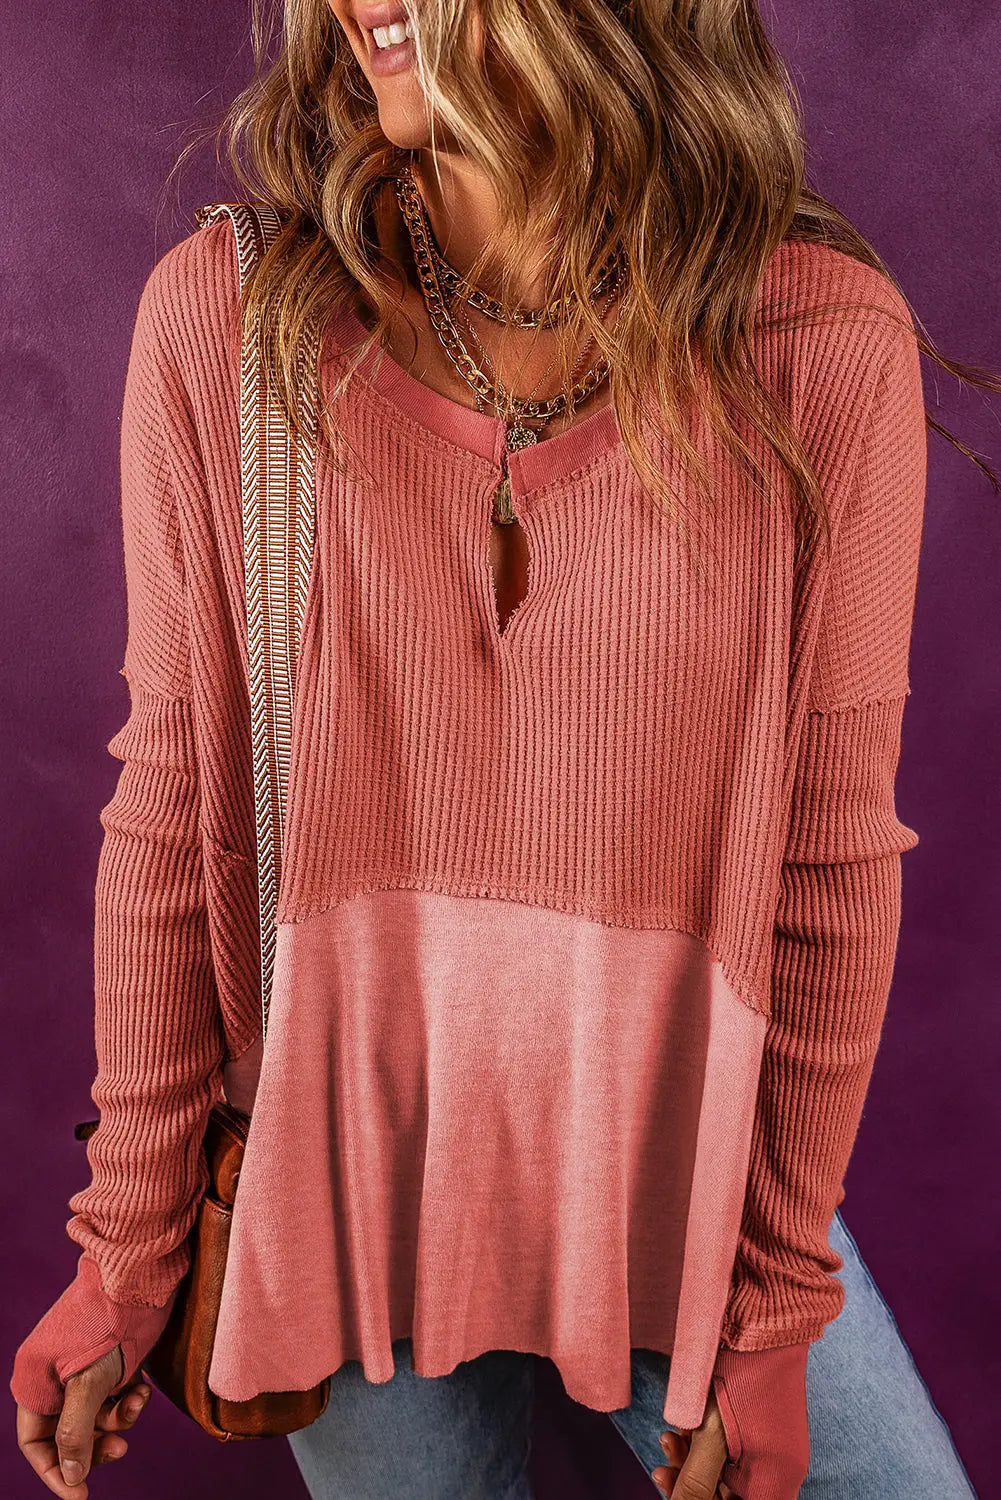 Mineral red exposed seam slit neck waffle knit patchwork top - s / 62.7% polyester + 37.3% cotton - long sleeve tops